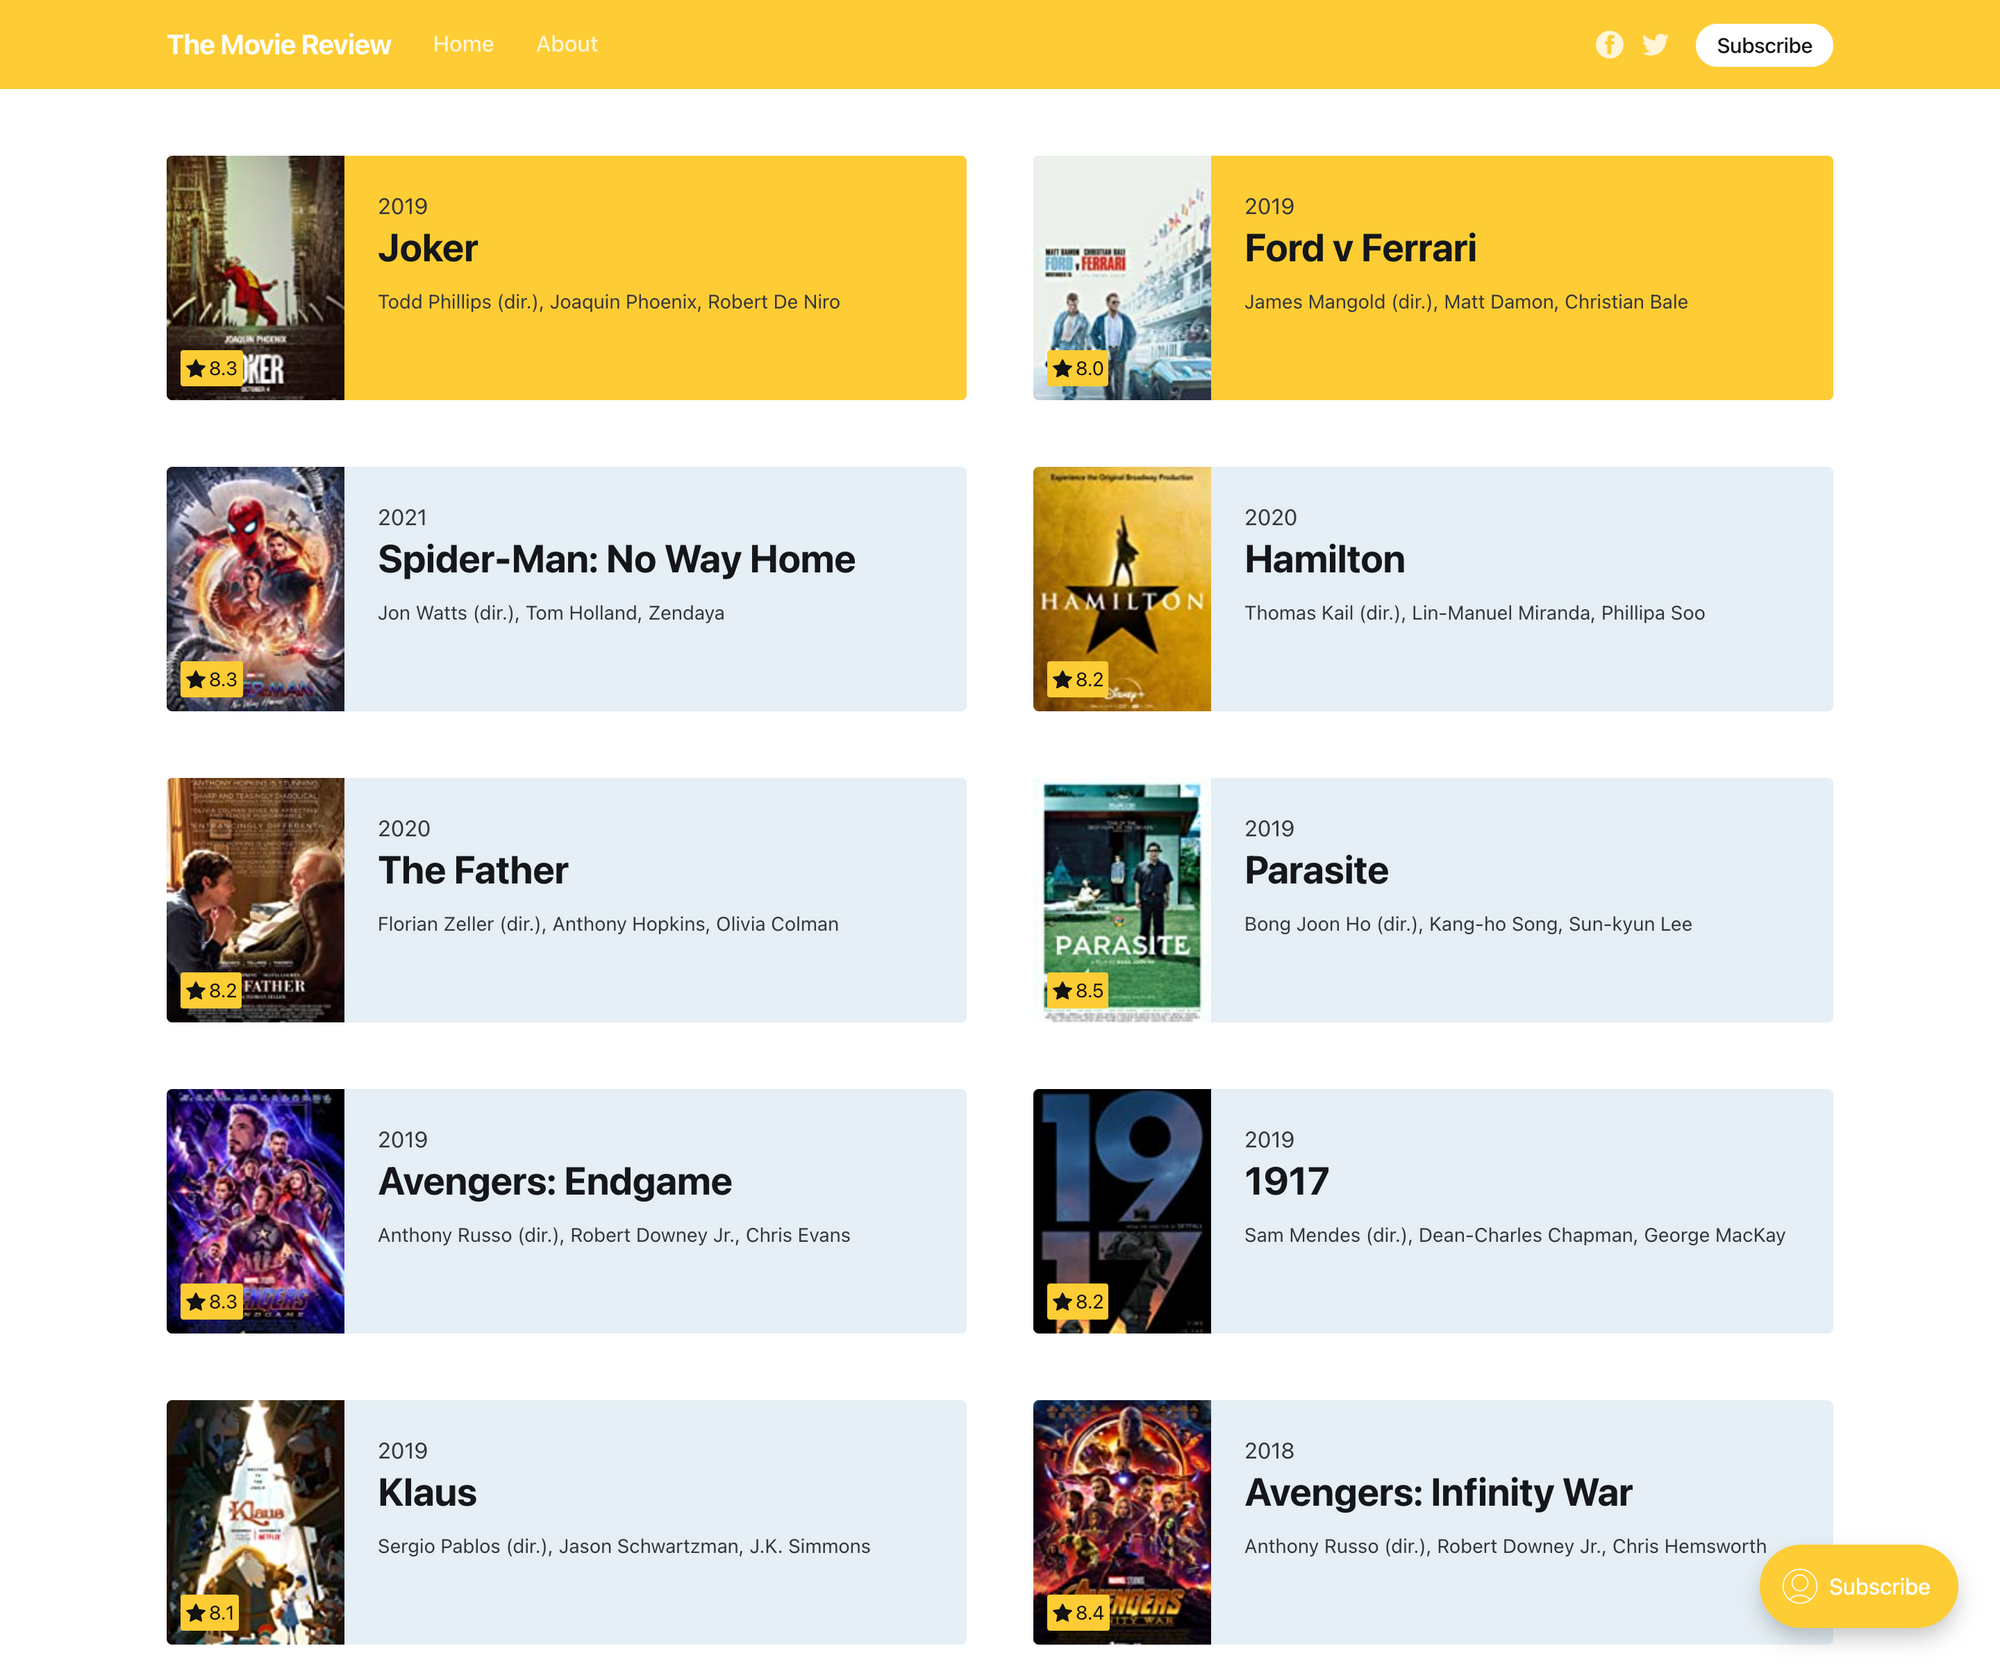 Featured movies are at the top, movies sorted by release date follow